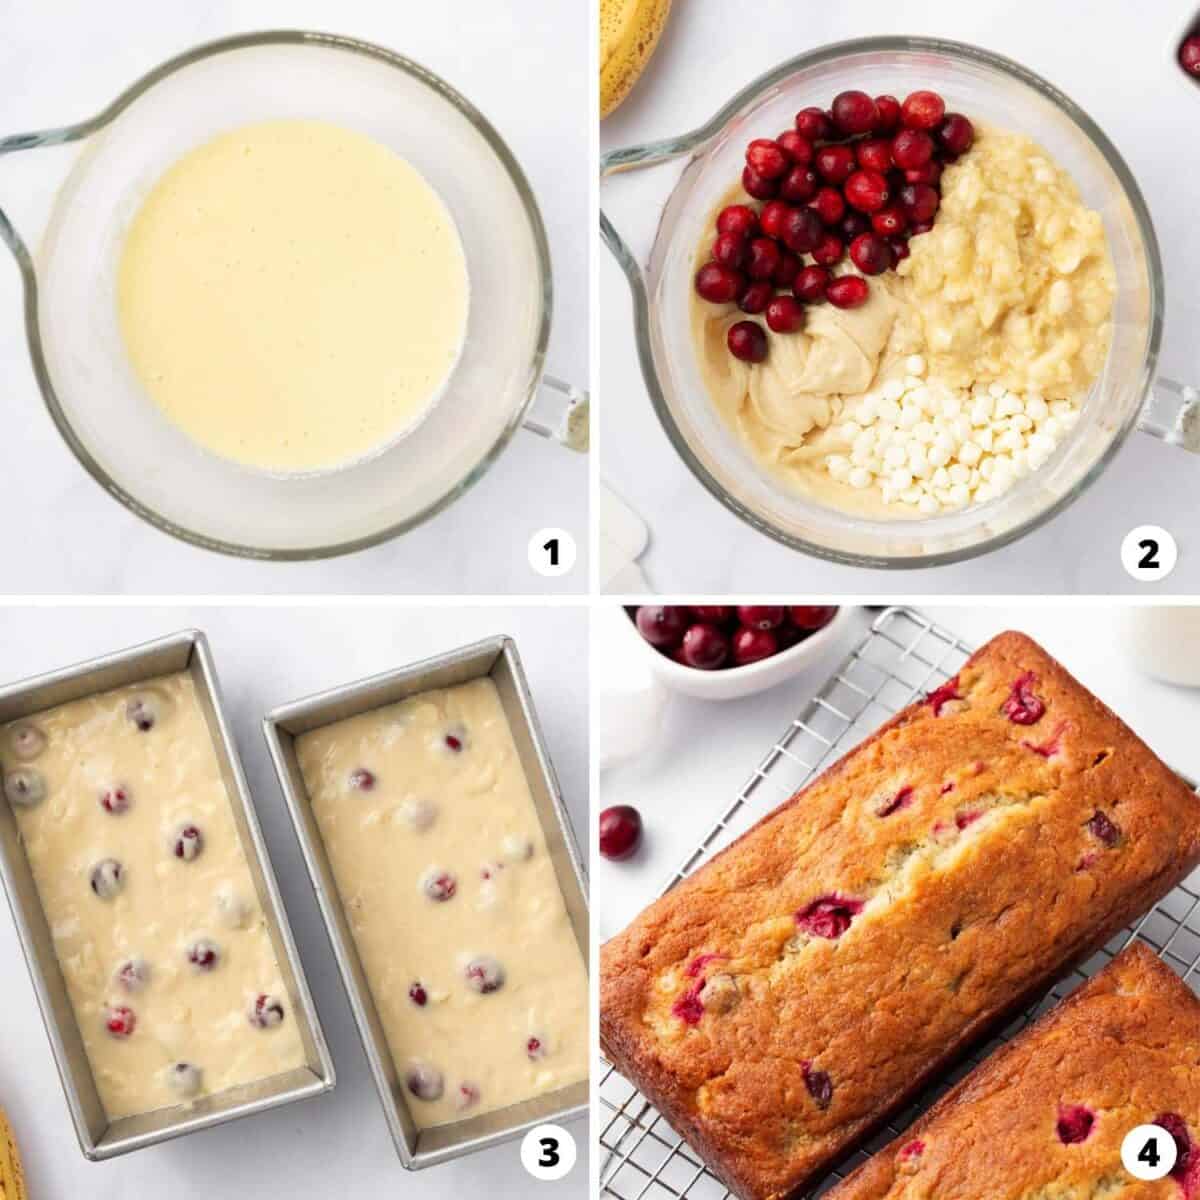 Showing how to make cranberry banana bread in a 4 step collage.